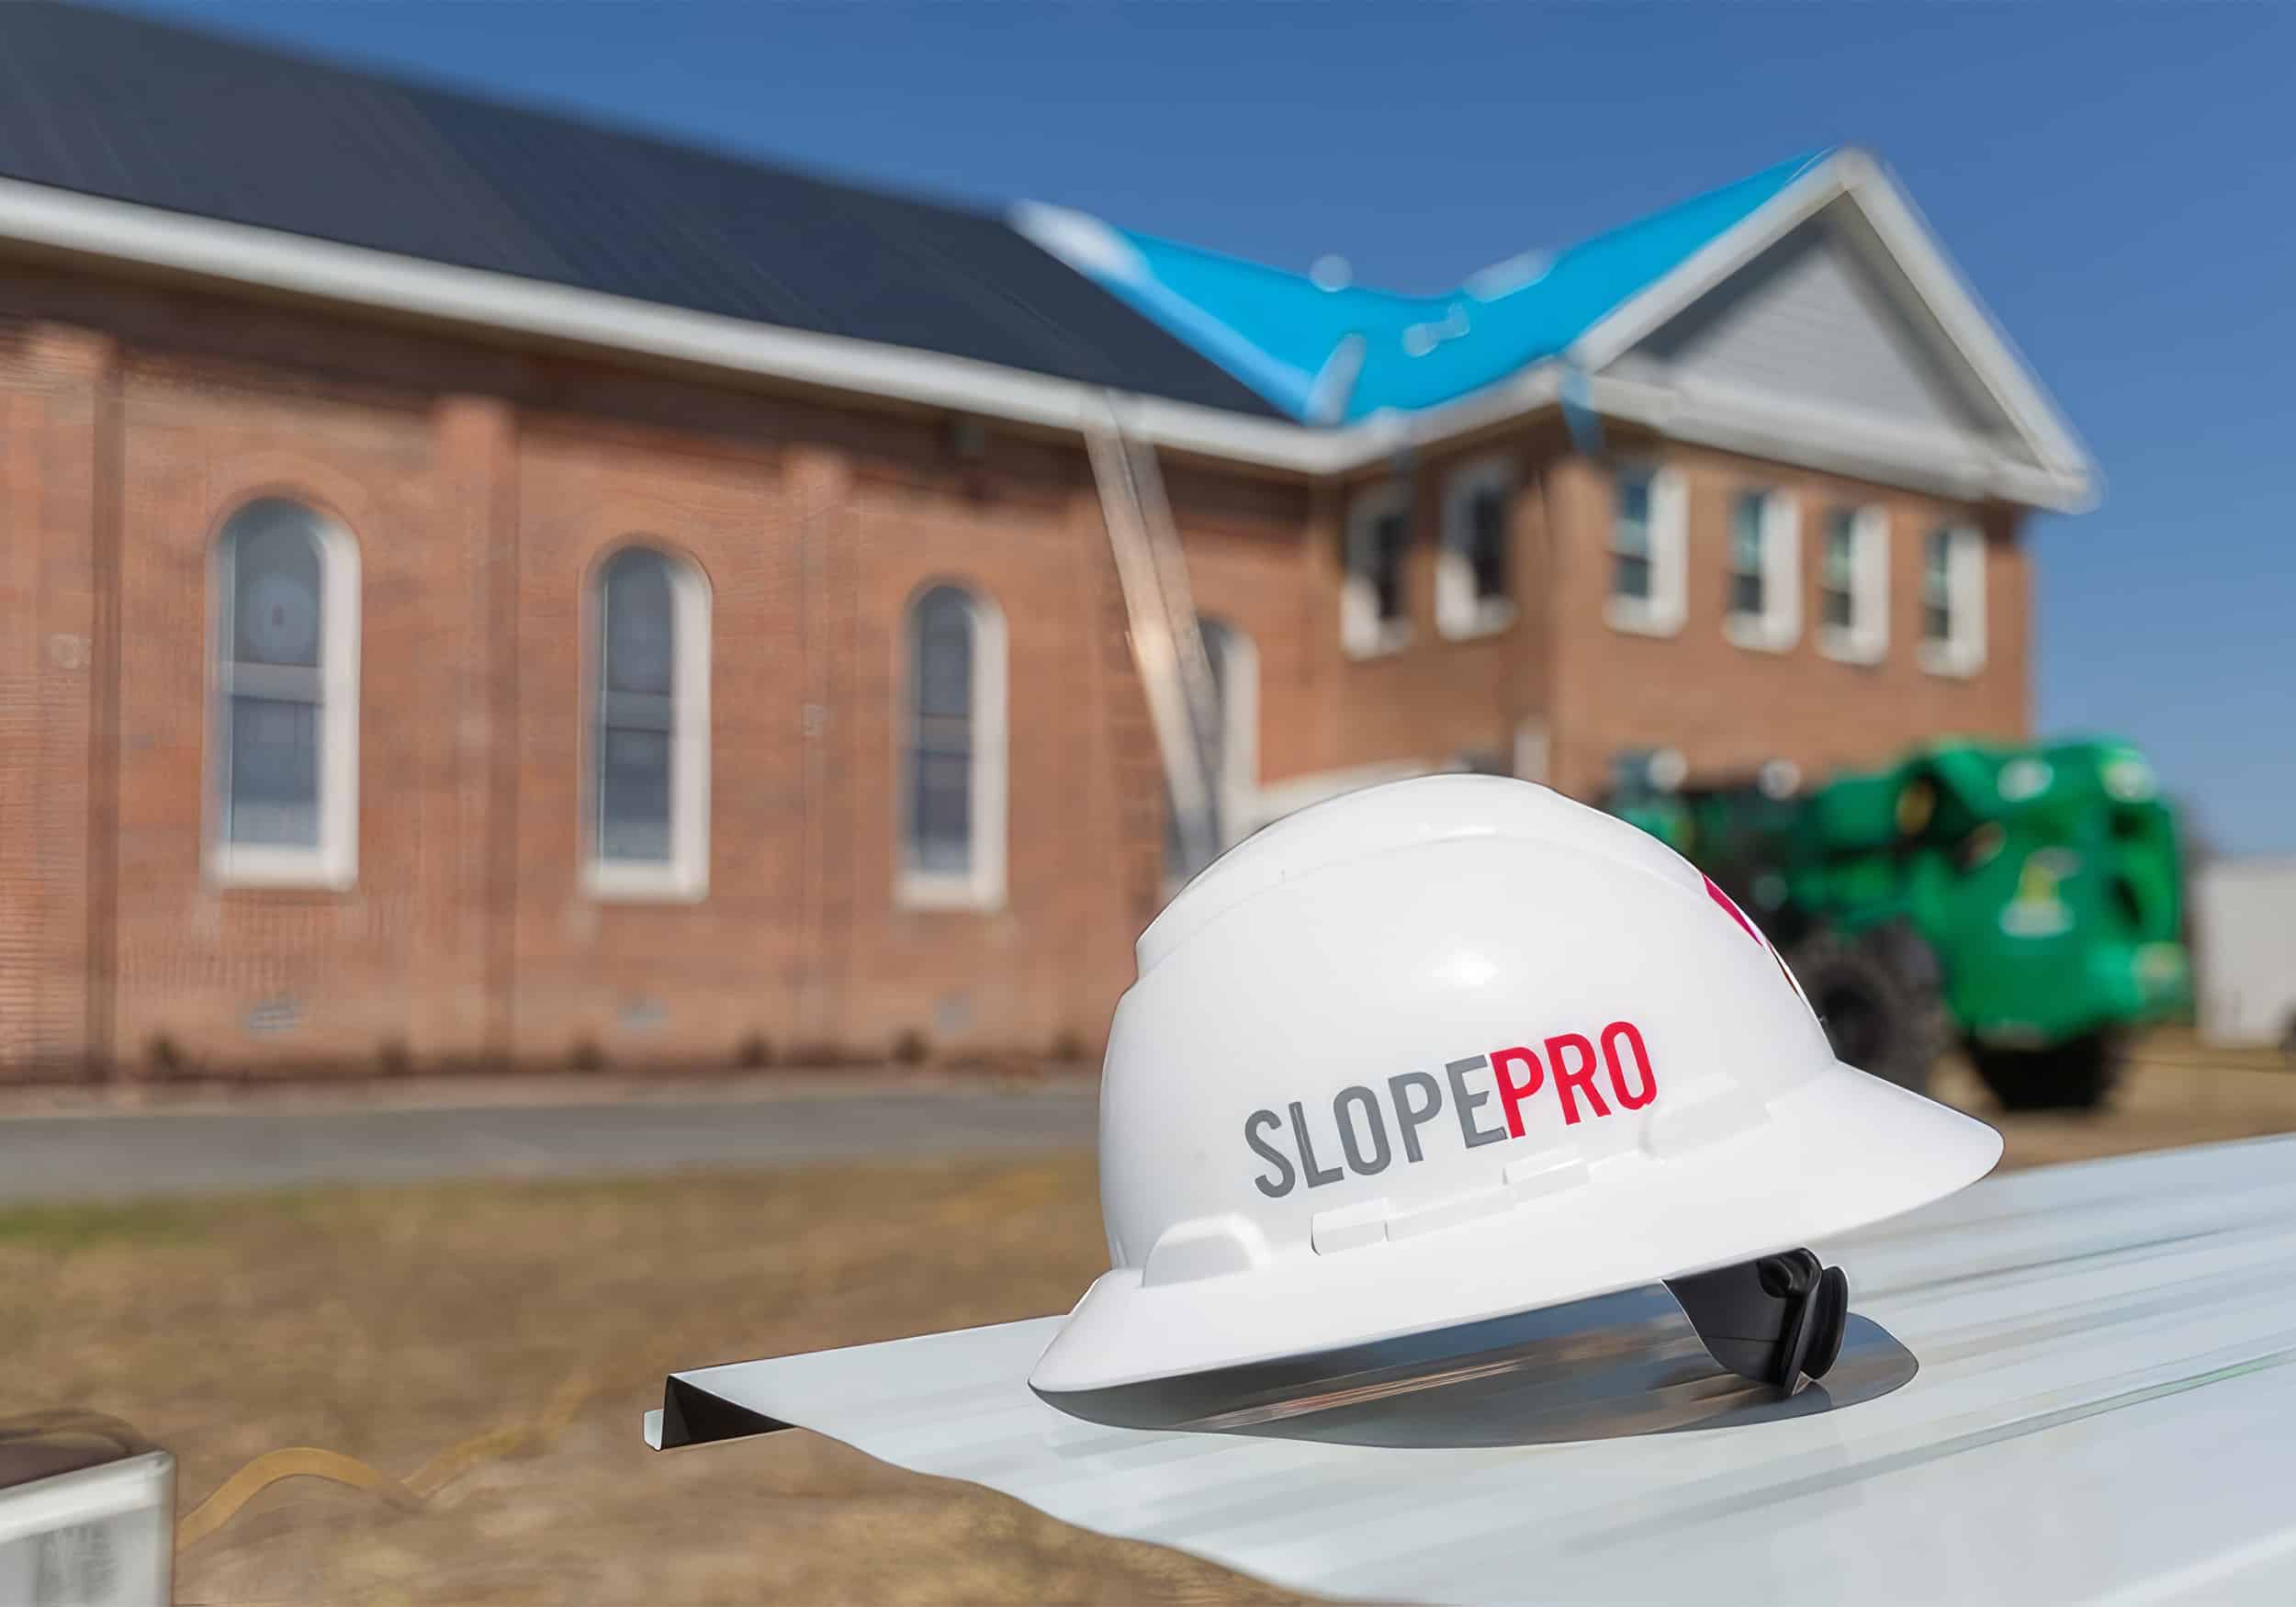 Commercial roof repair with SlopePro helmet in the foreground